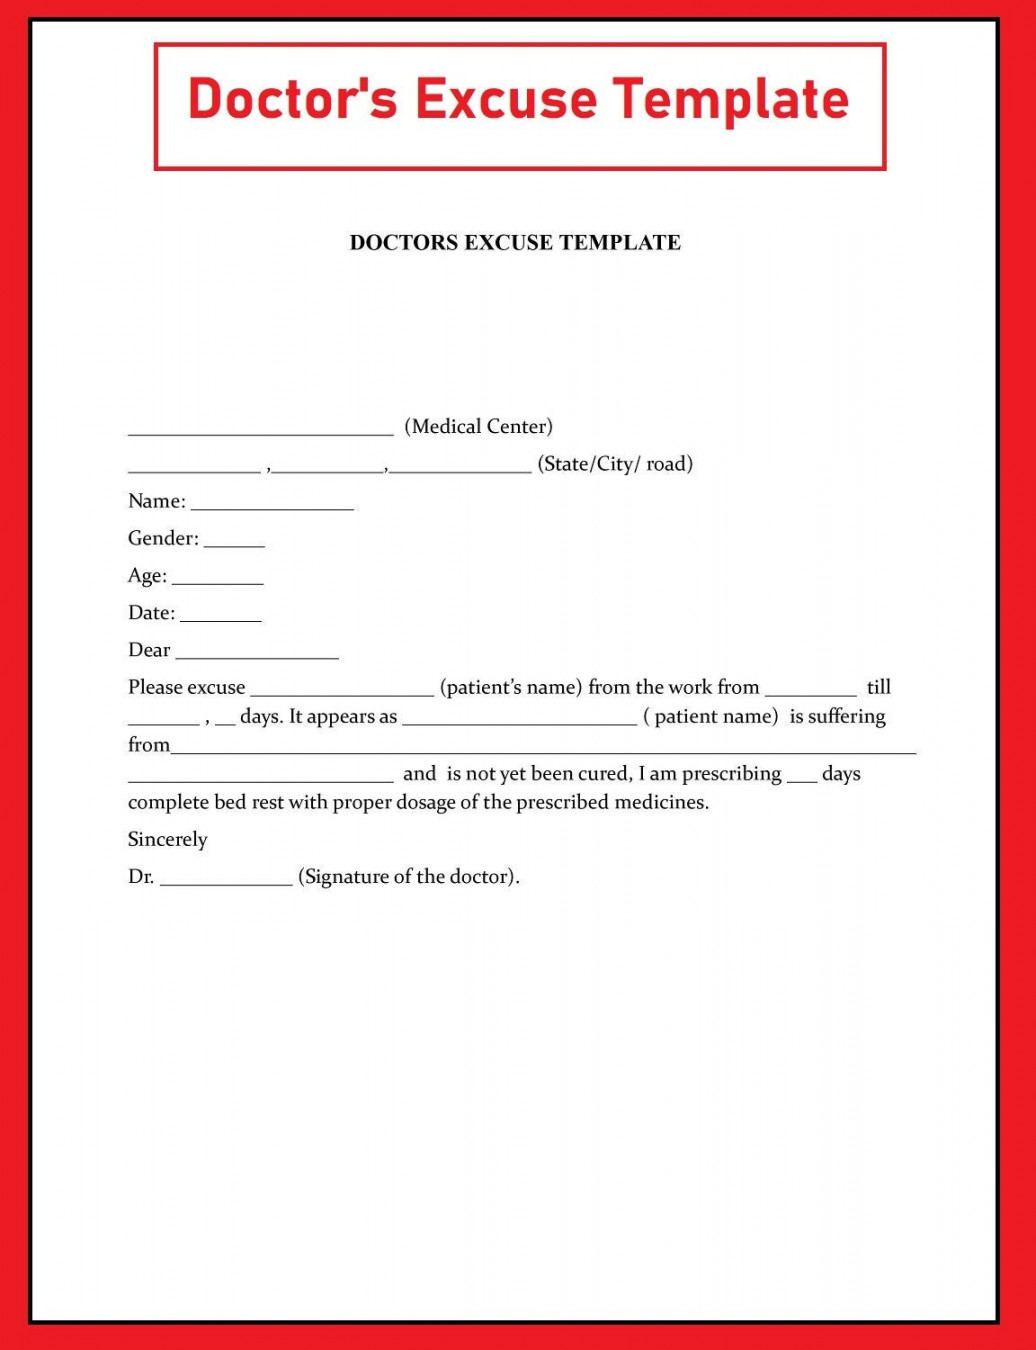 Doctors Excuse Template - Work Excuse Doctor Note - School Excuse Doctors  Note - Instant Download - Medical Excuse Letter - PDF and Word